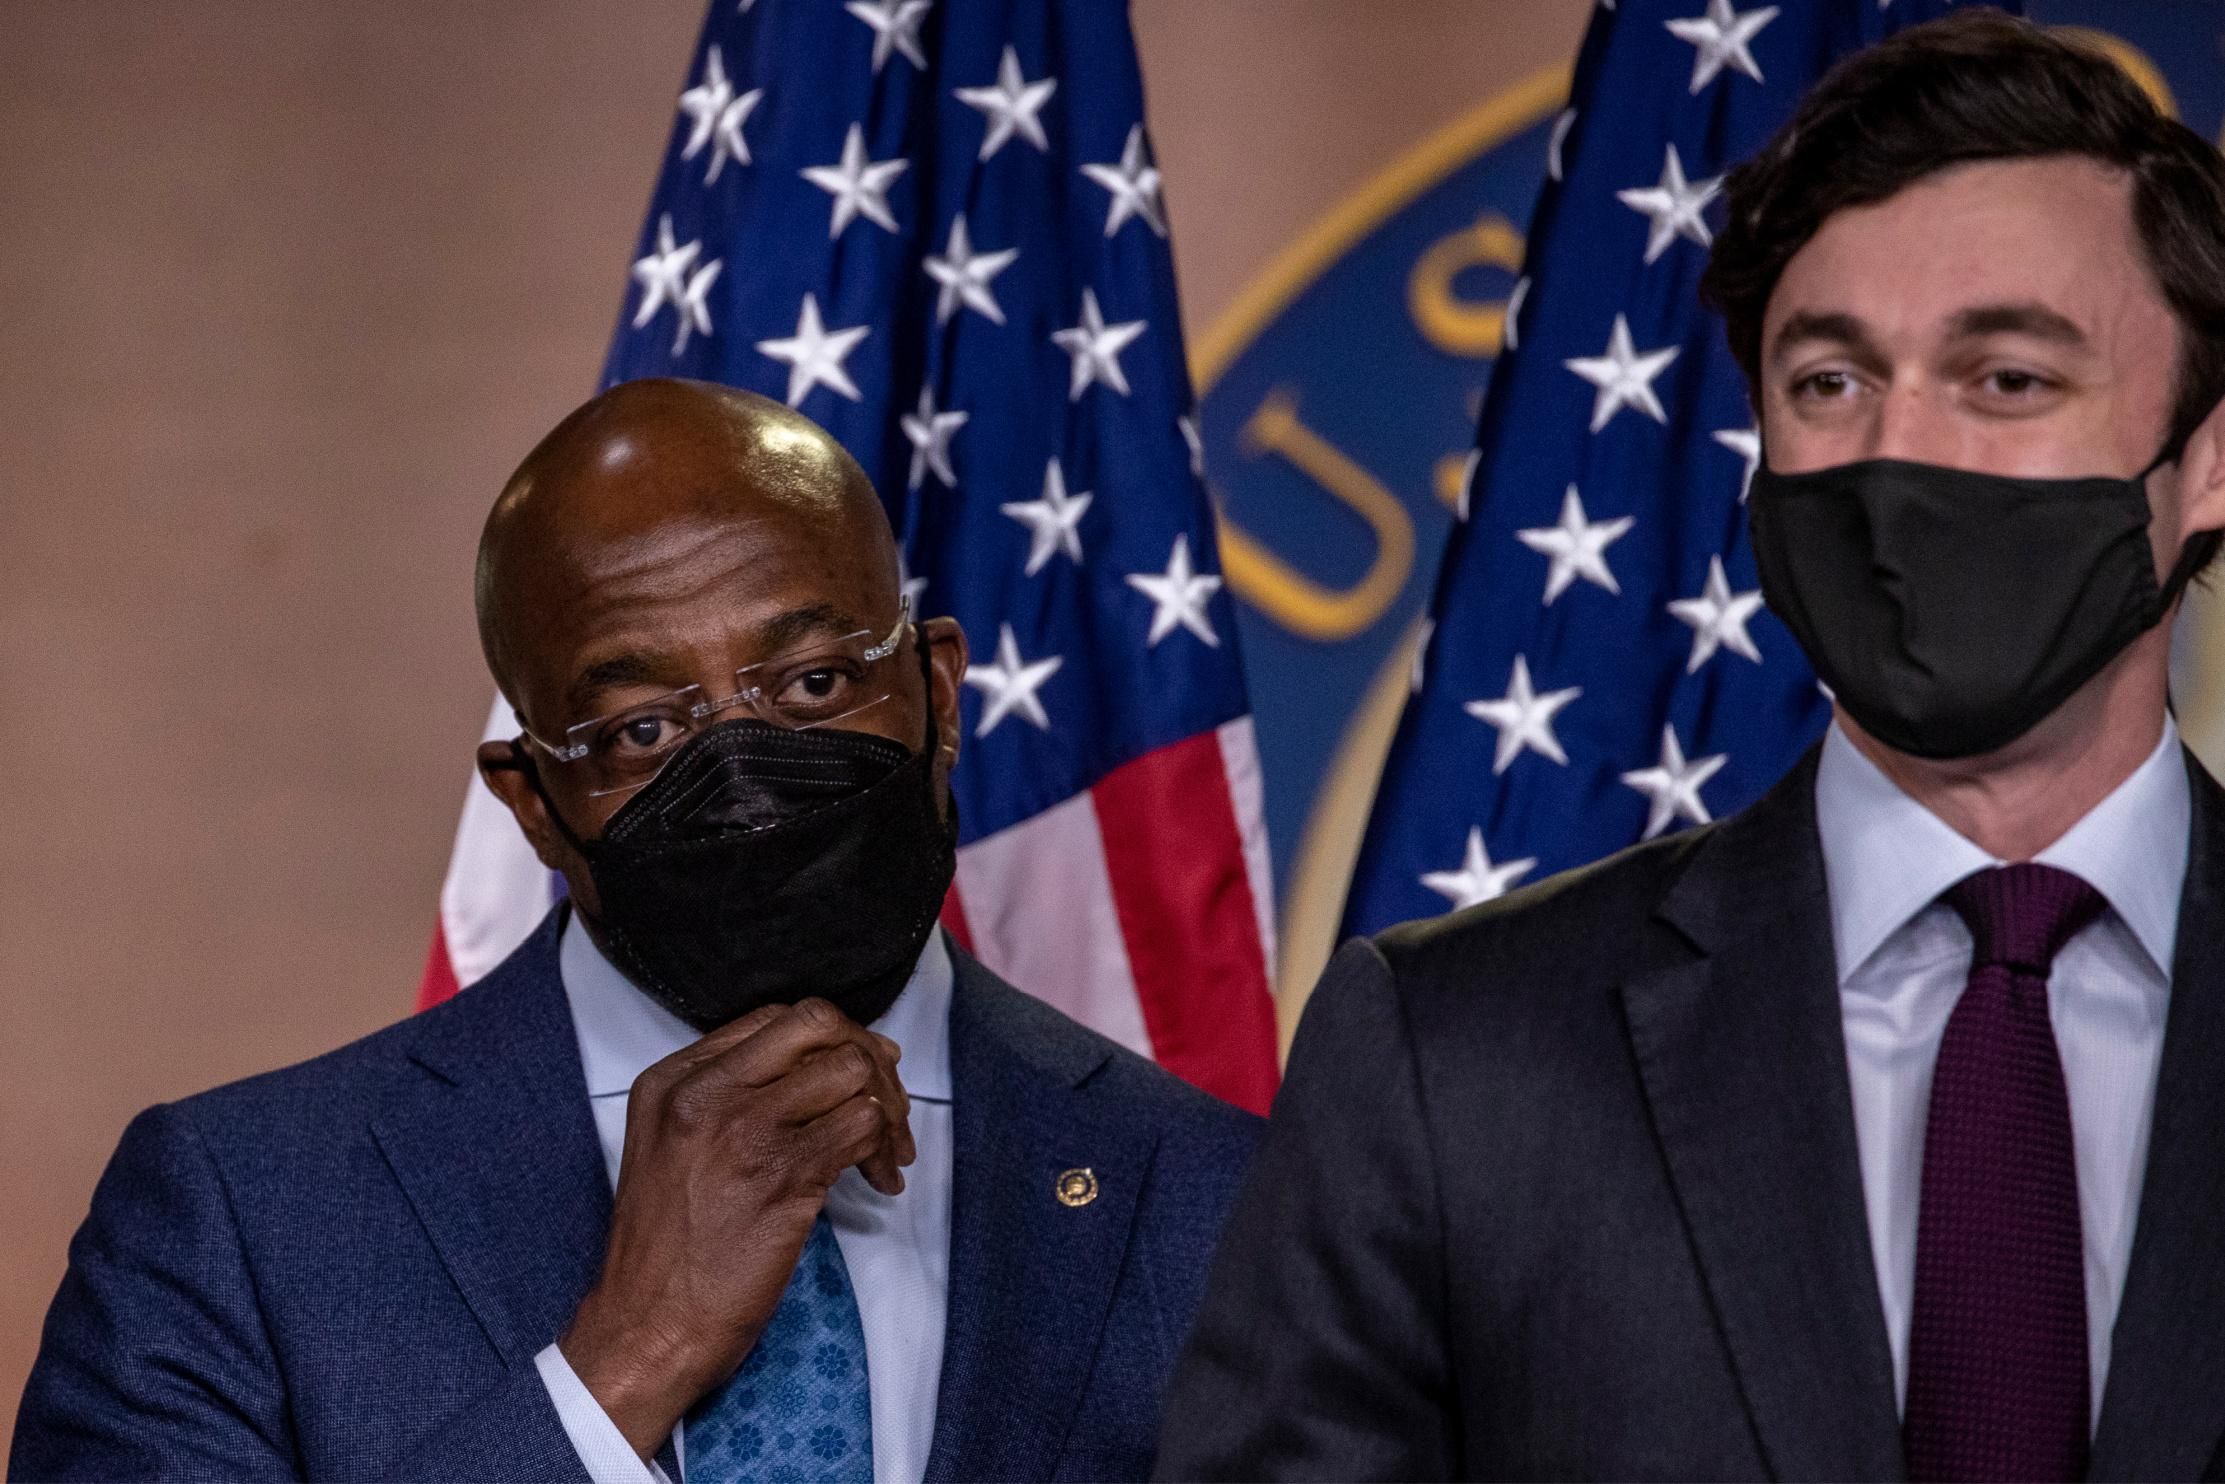 U.S. Sens. Raphael Warnock and Jon Ossoff, both Democrats who represent Georgia, proposed legislation to block states from banning the distribution of food and water to voters. (Photo: Tasos Katopodis/Getty Images)